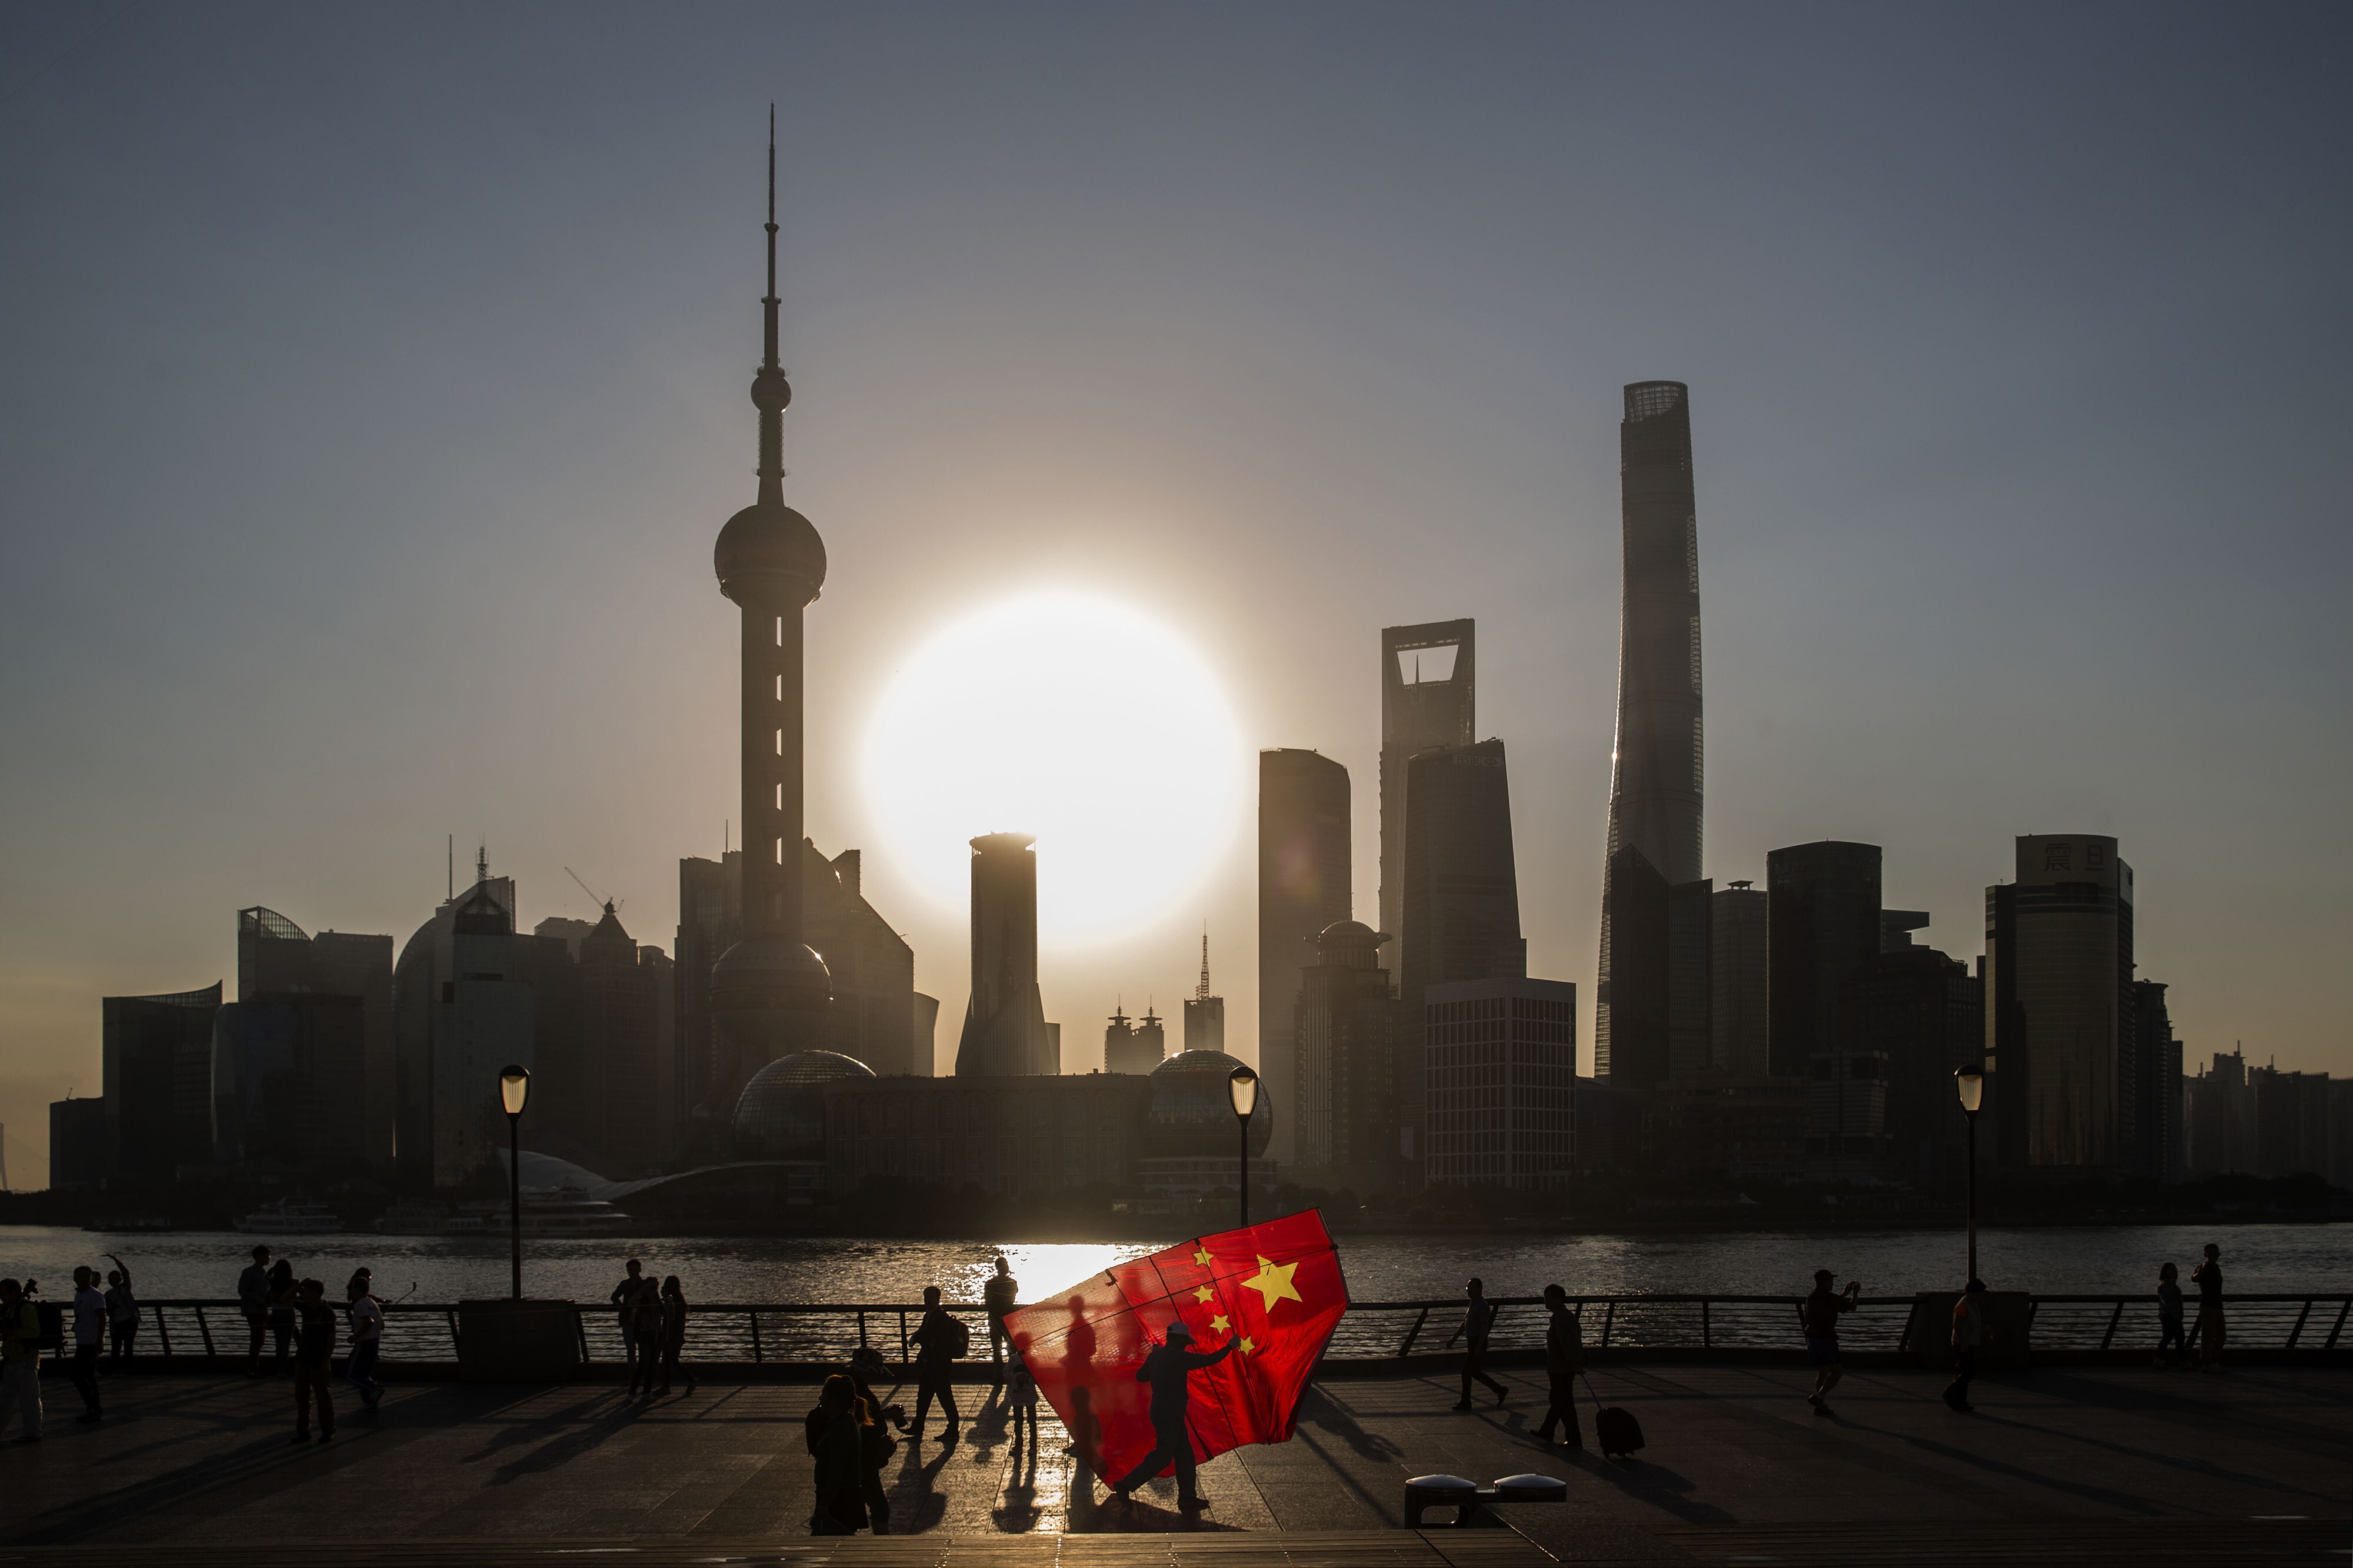 A man carrying a kite in the shape of the Chinese national flag walks along the Bund as the sun rises behind the buildings of Pudong’s Lujiazui financial district in Shanghai in October 2015. China is seeking to build heavyweight investment banks to take on foreign players. Photographer: Bloomberg